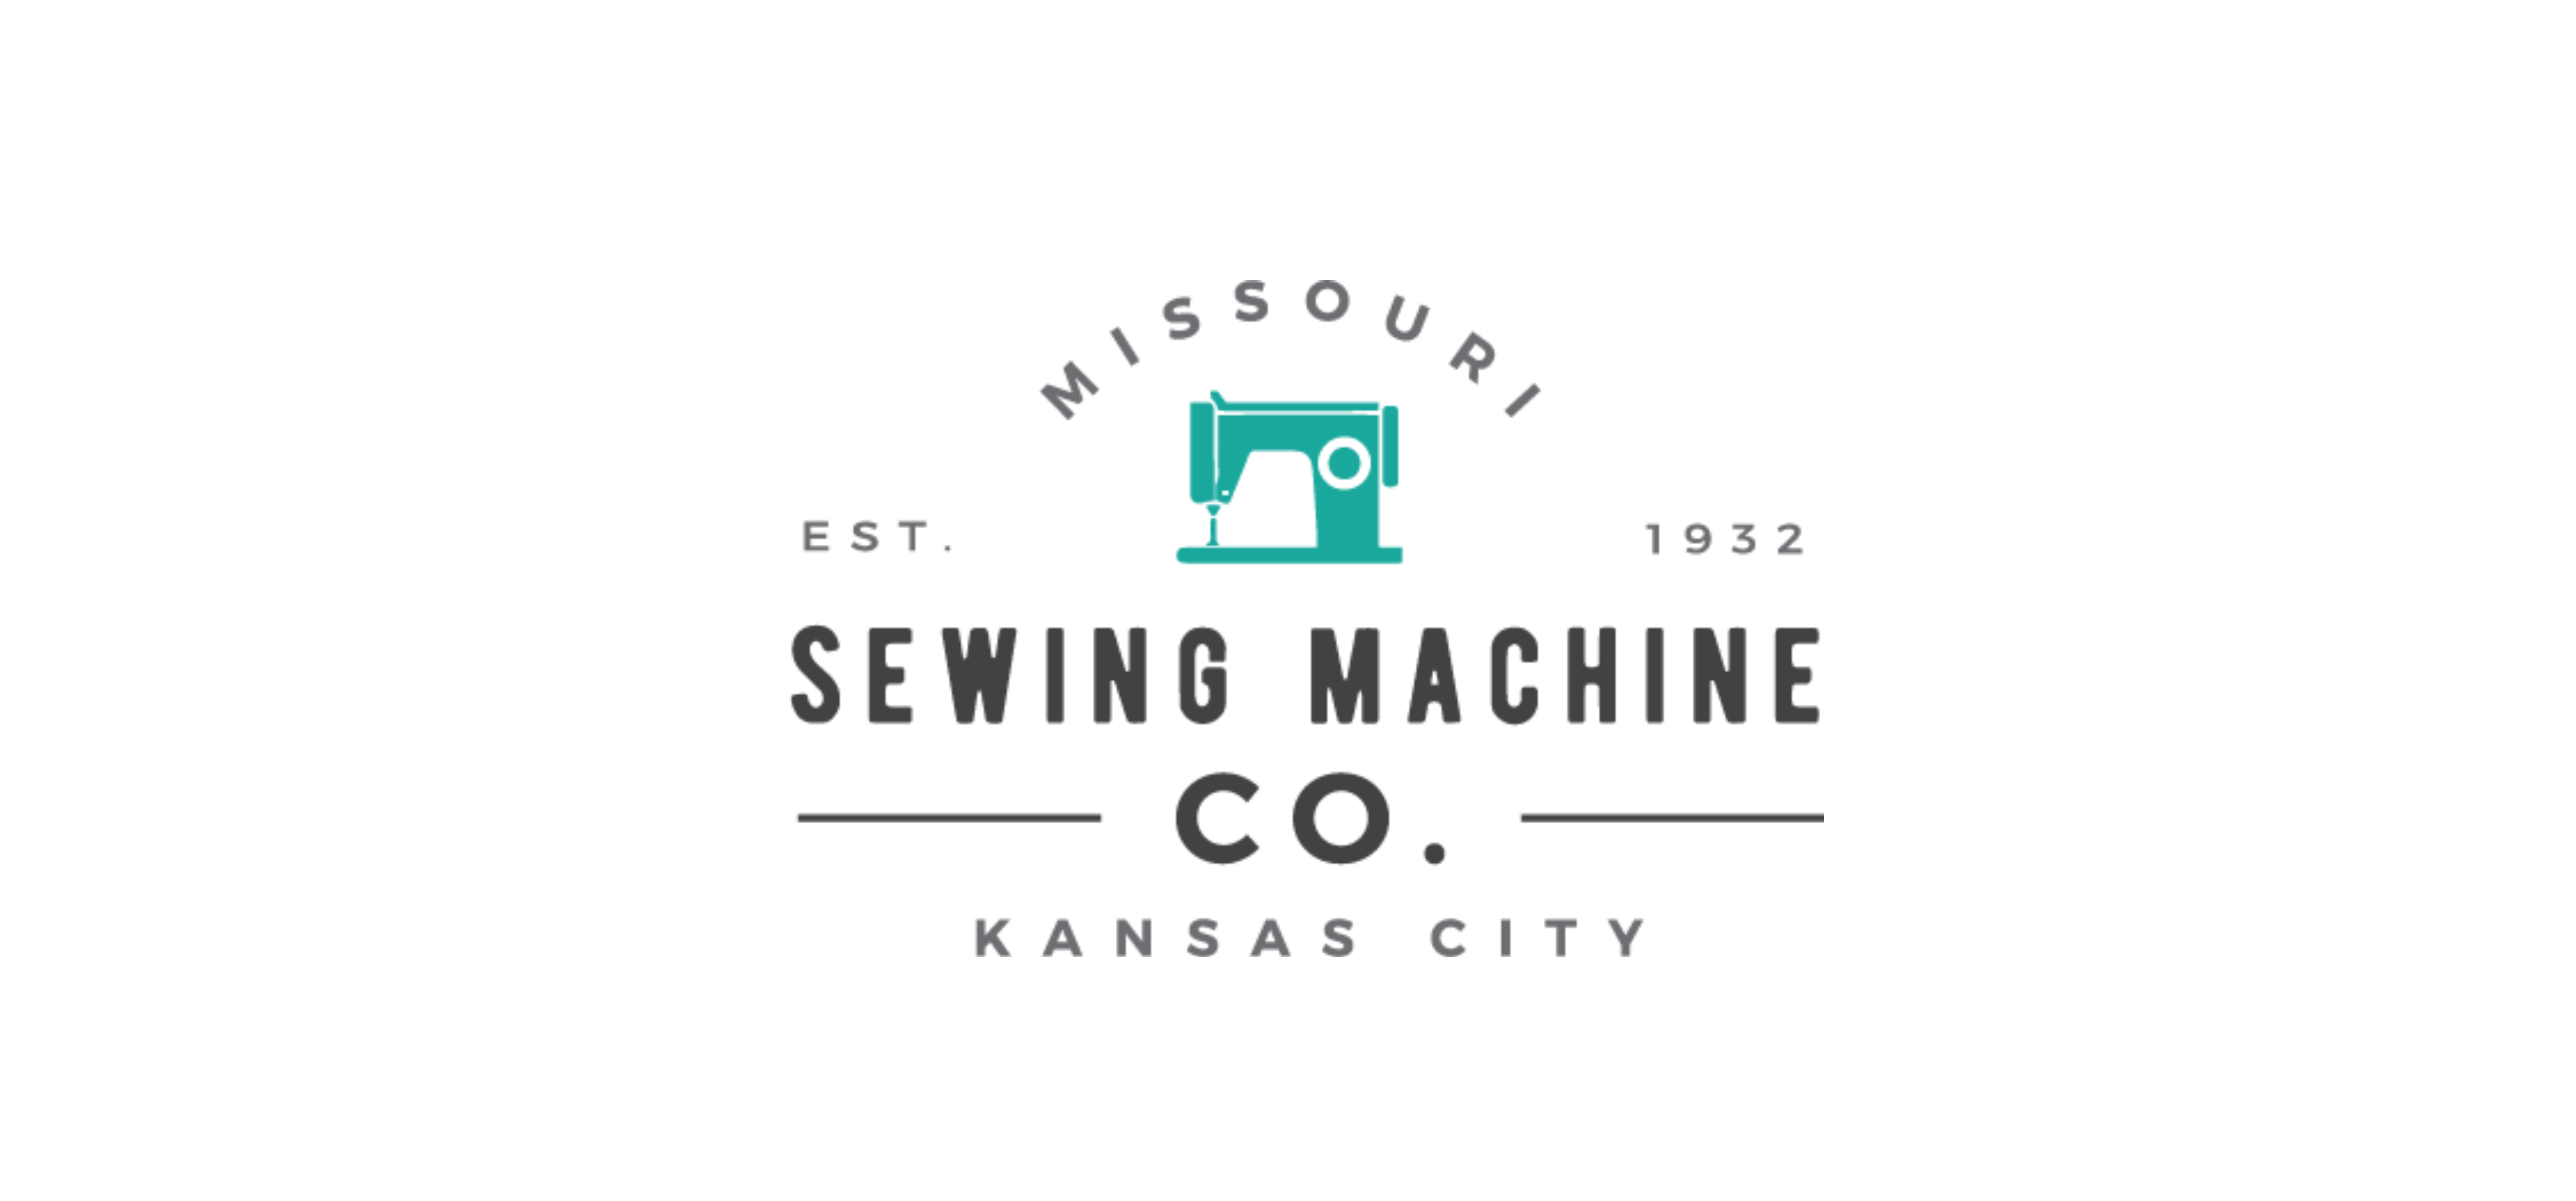 Concealed Zipper Foot - Missouri Sewing Machine Company